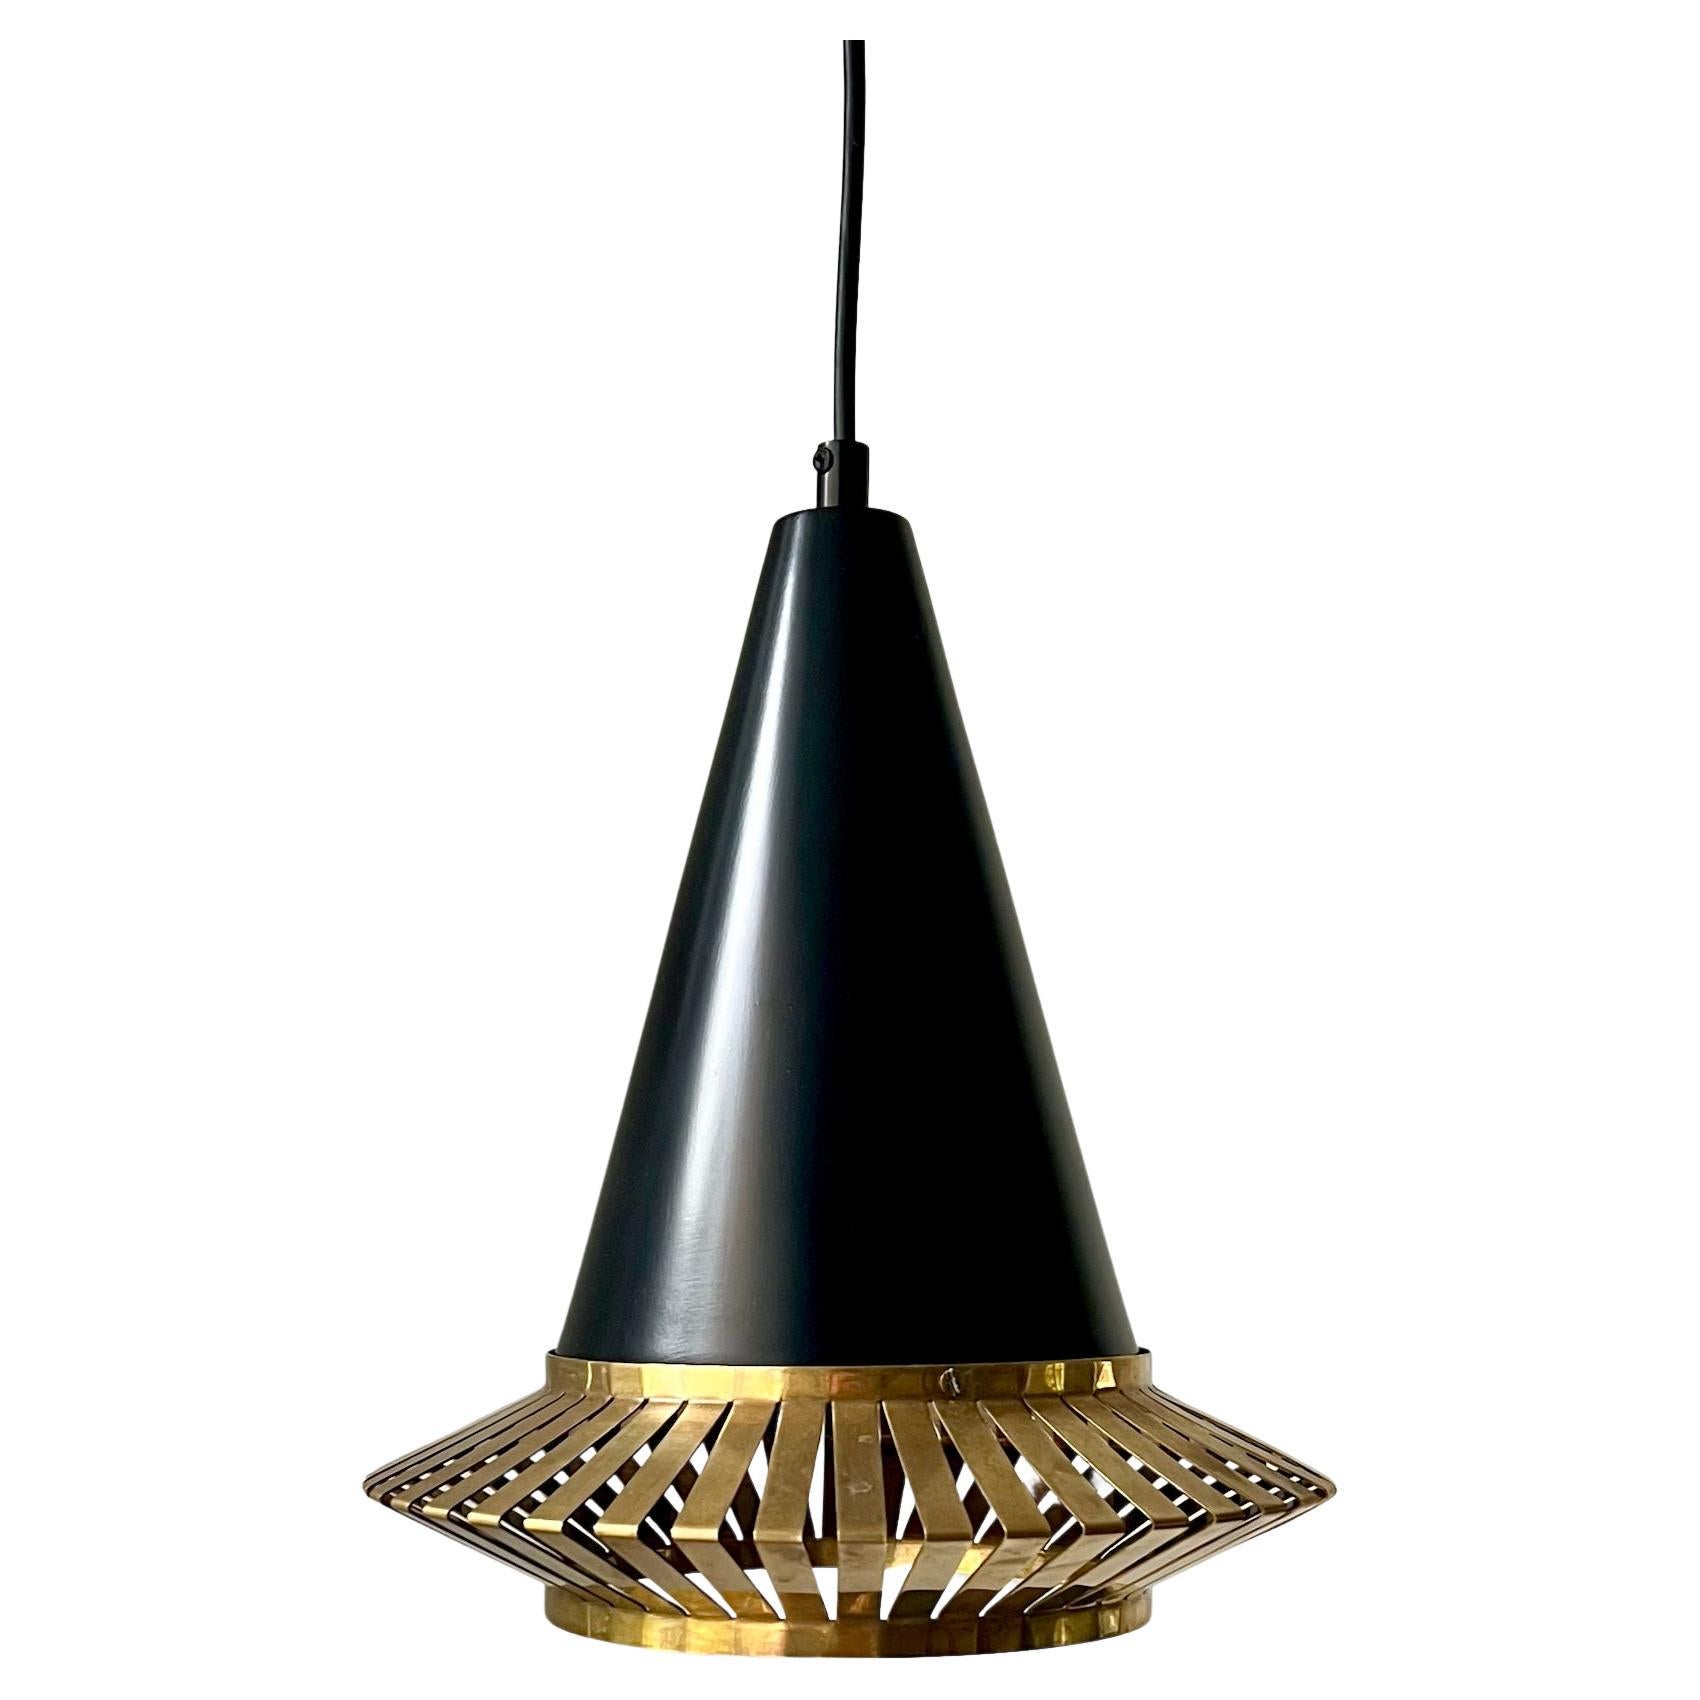 Pendant Lamp Model K 2-1 by Maria Lindeman for Idman of Finland Mid-20th Century For Sale